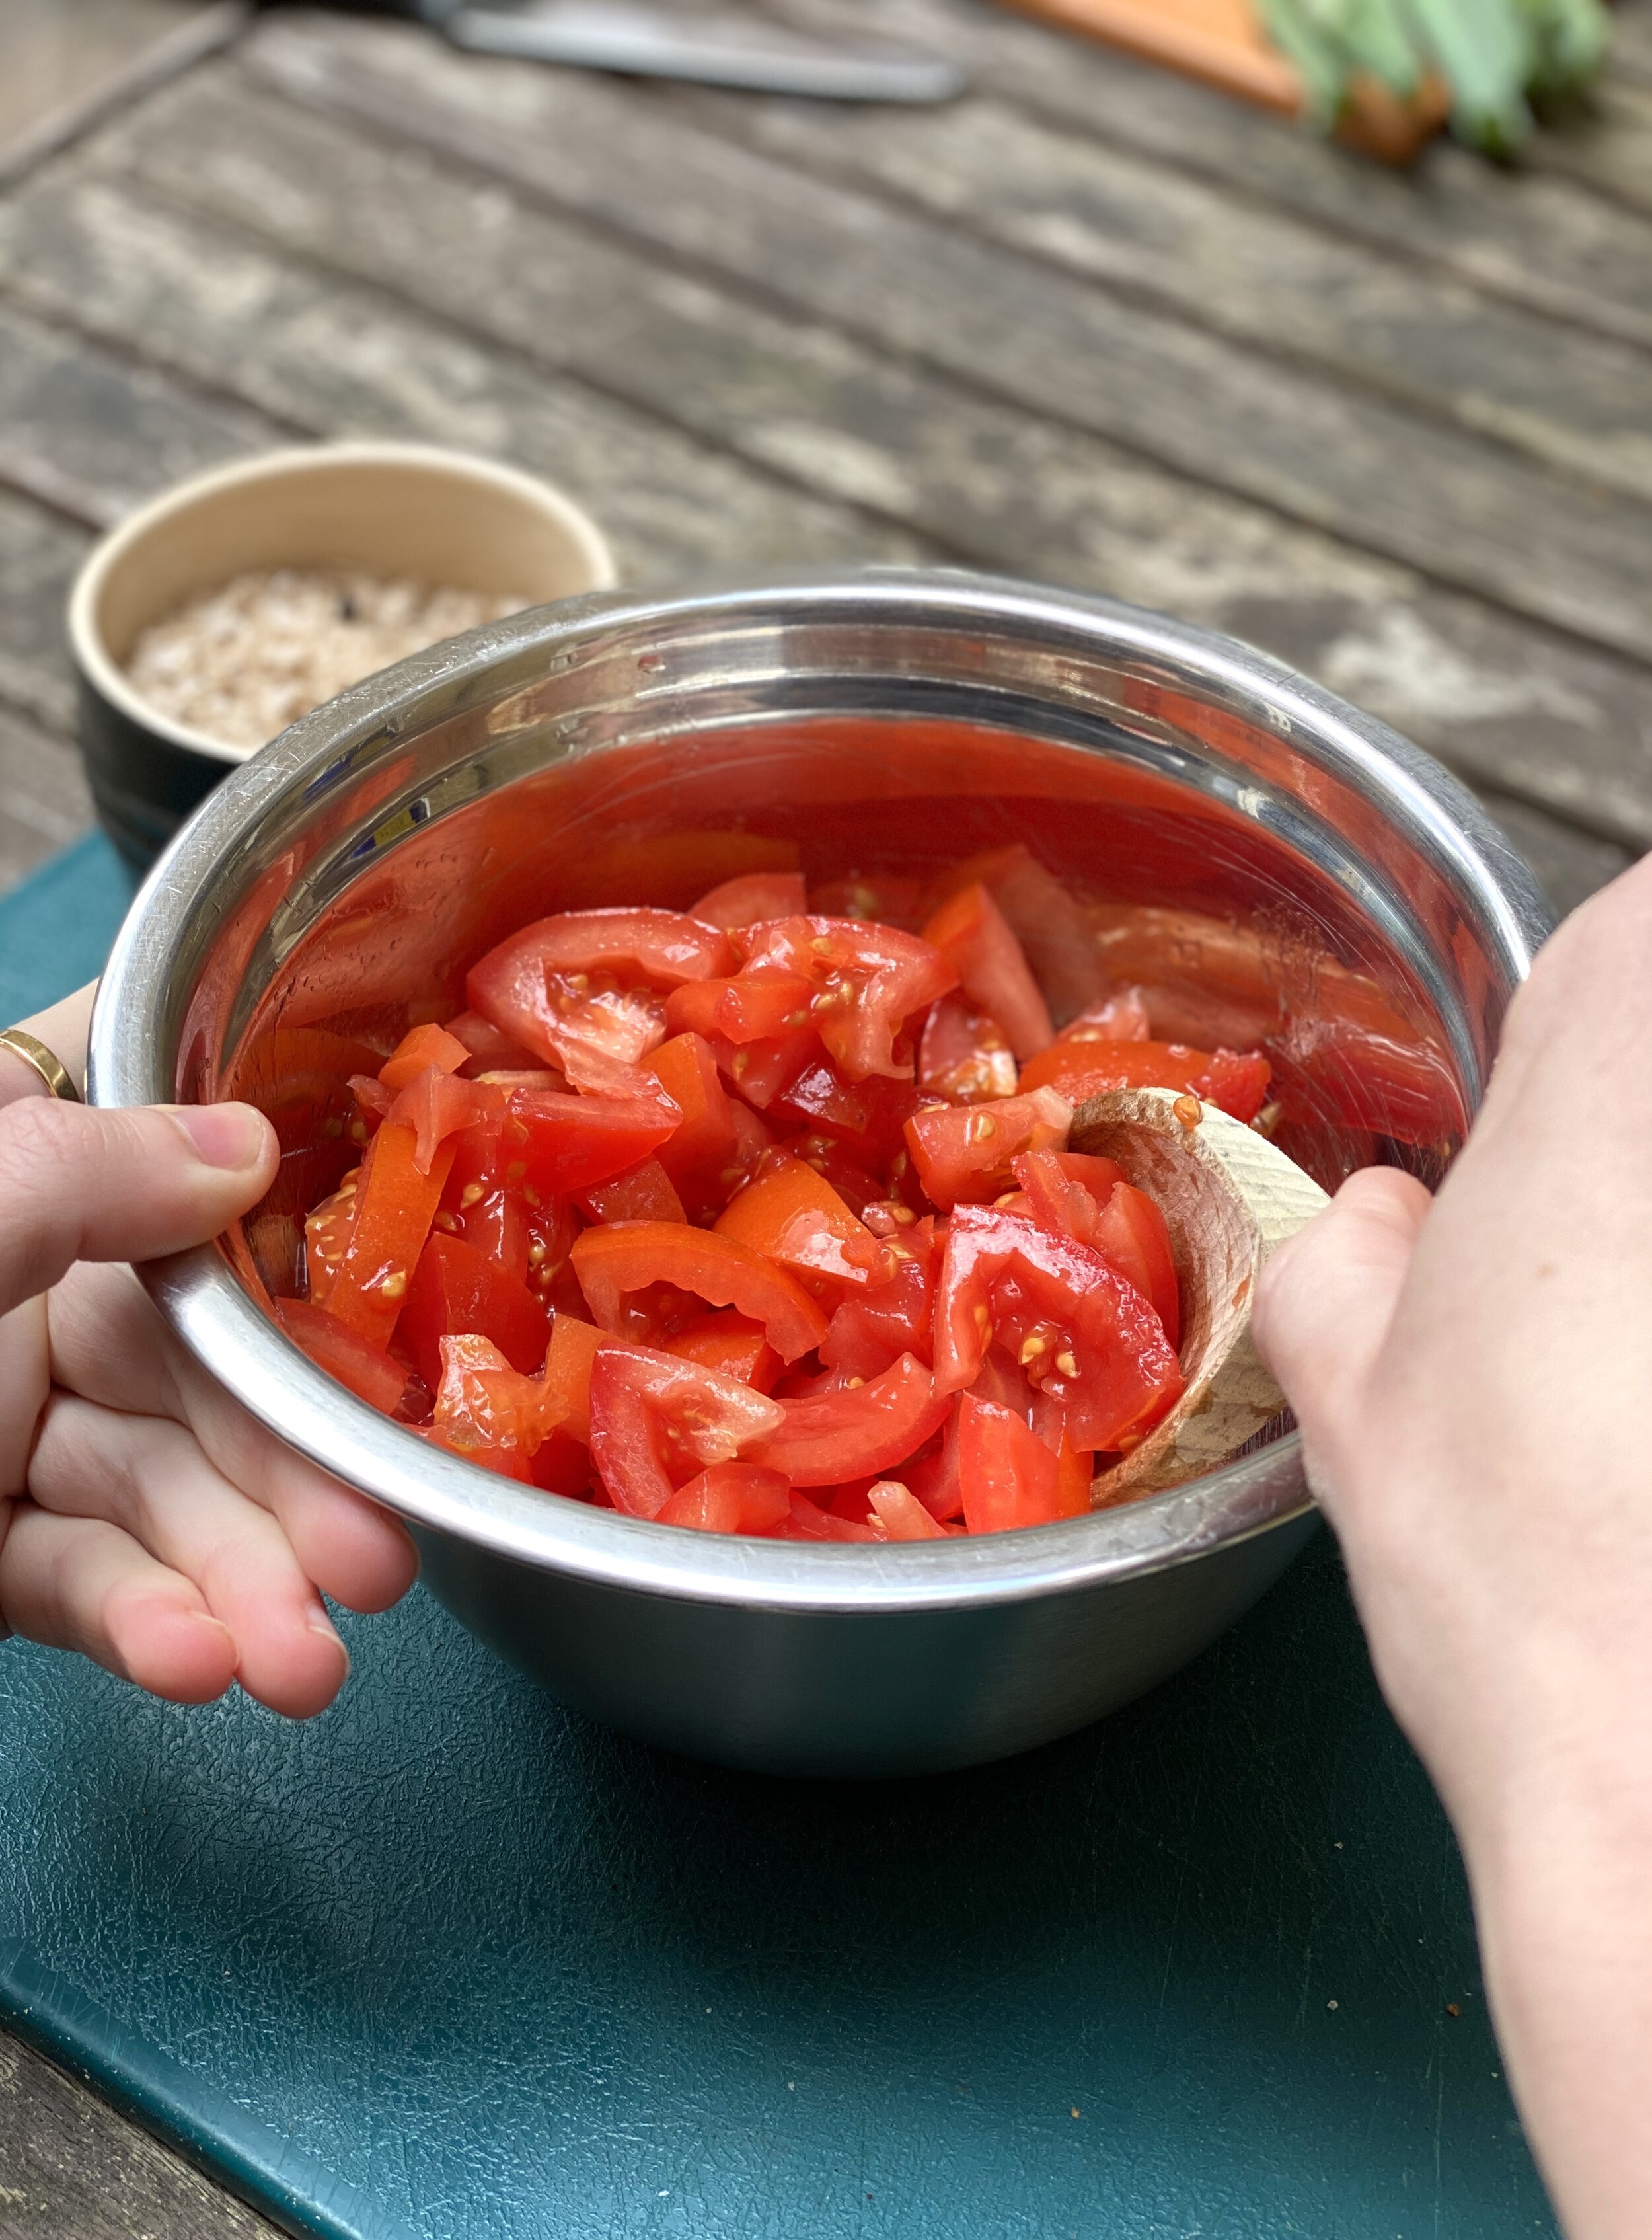 Mix tomatoes with olive oil and vinegar